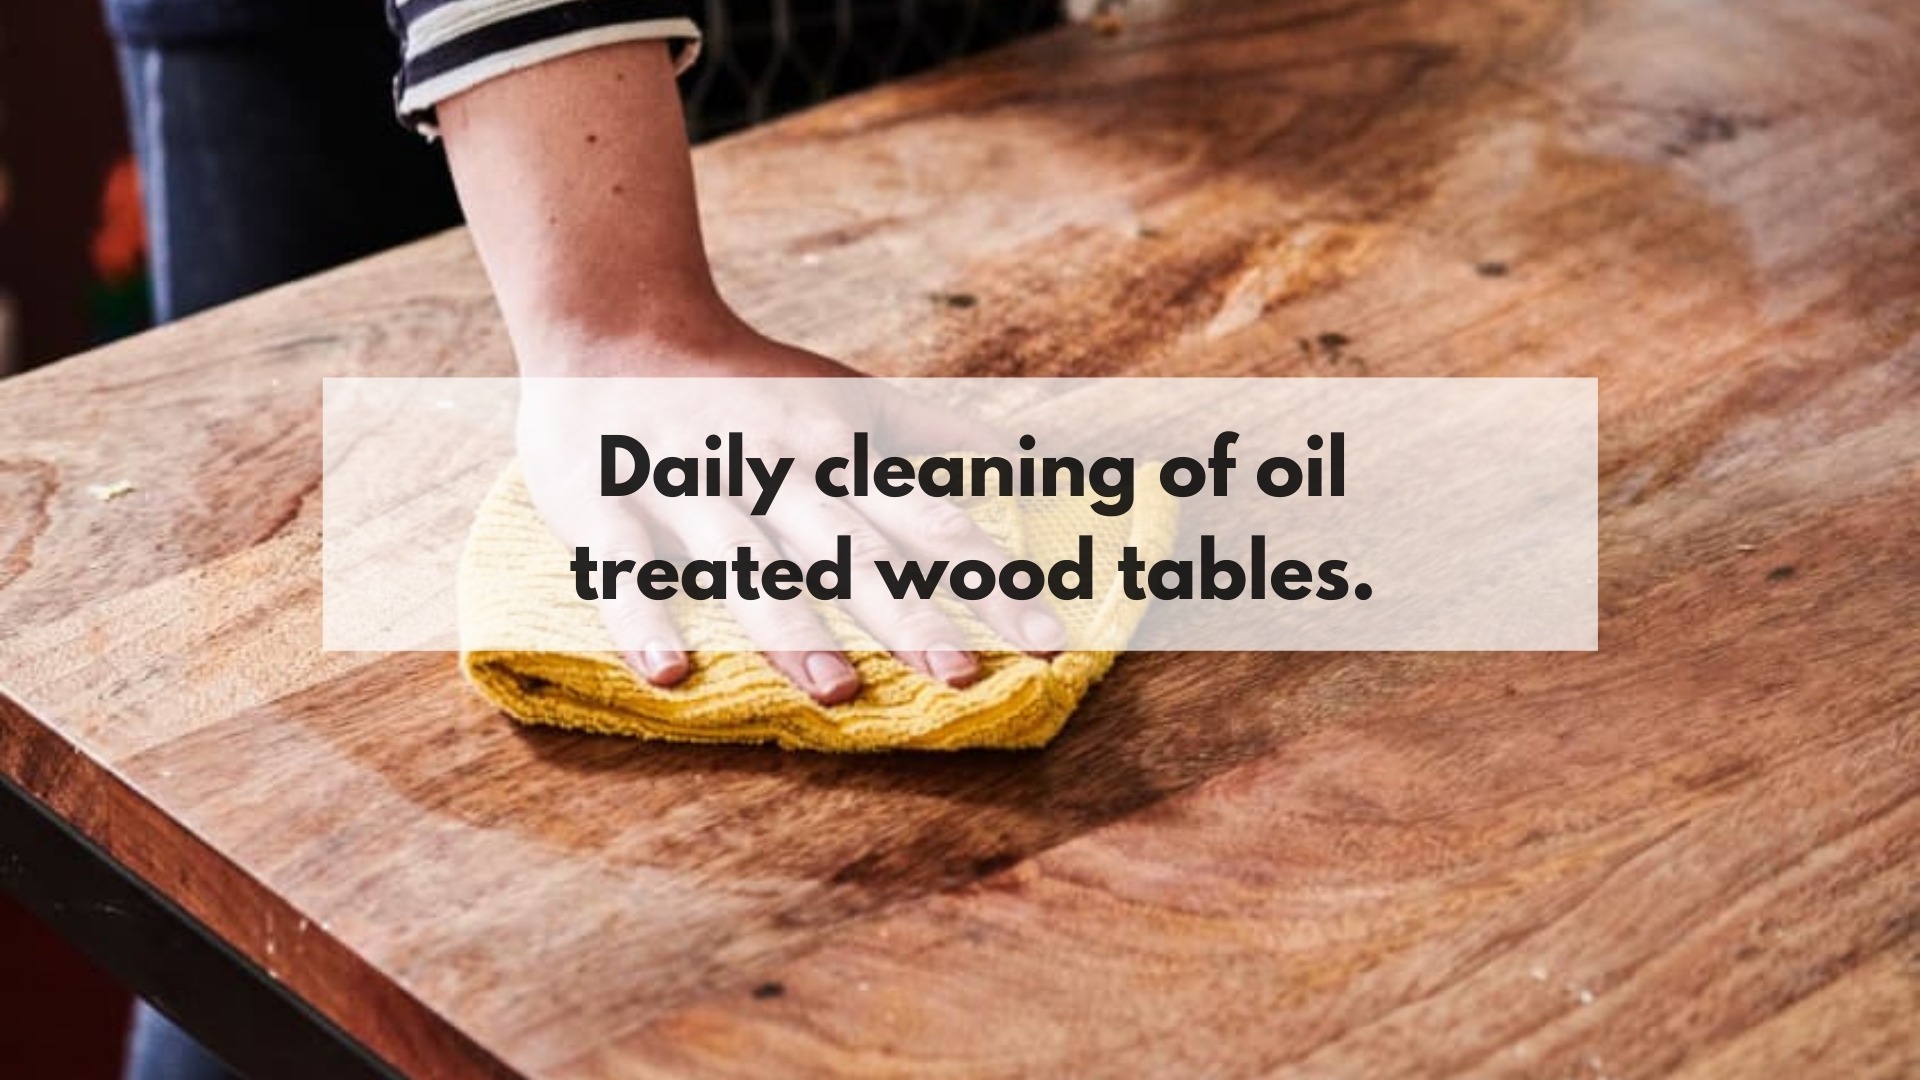 Daily cleaning of oil treated wood tables.